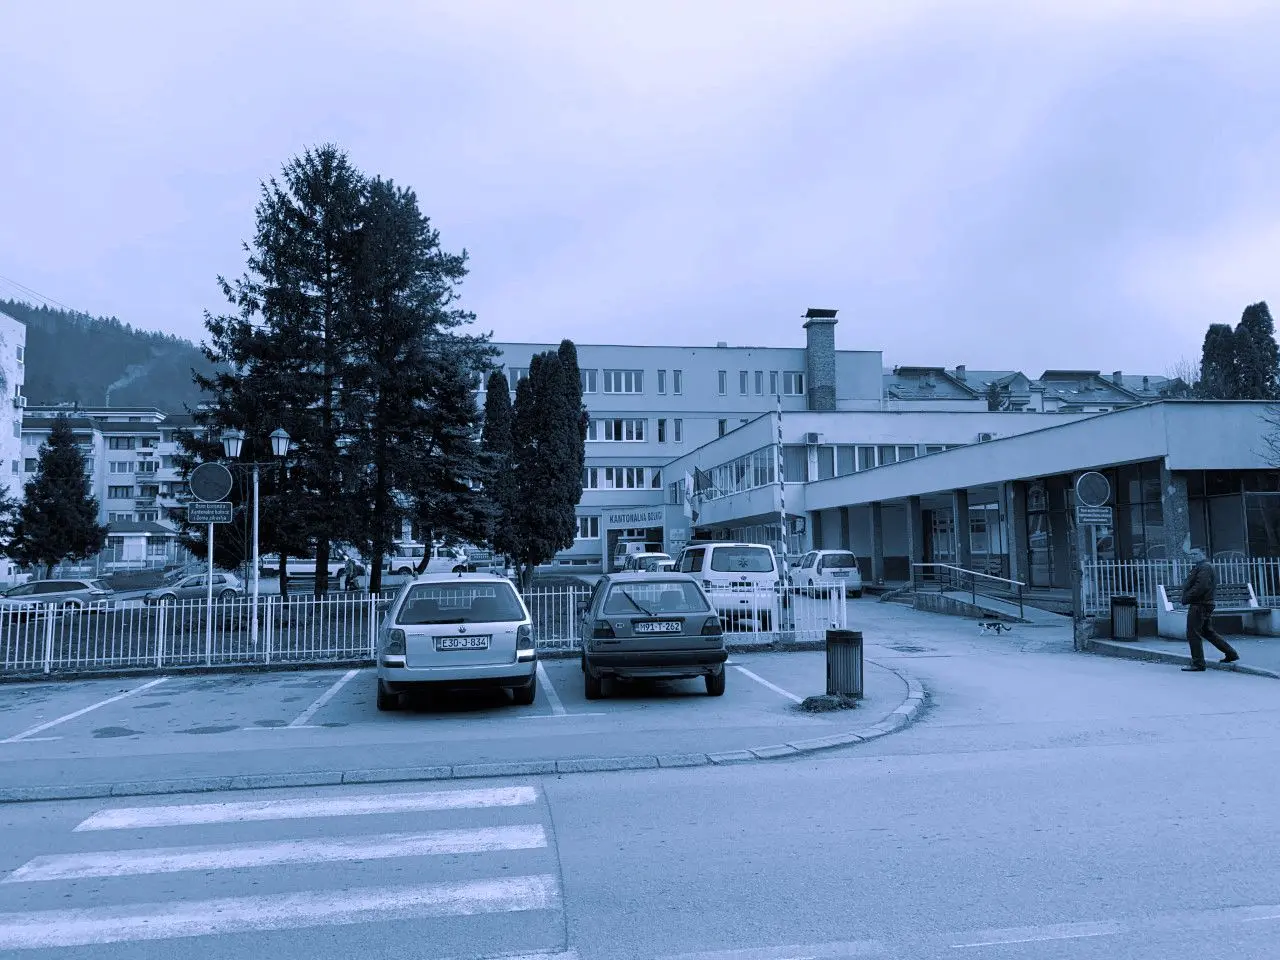 Blue-tinted image of a hospital with parking lot in front.